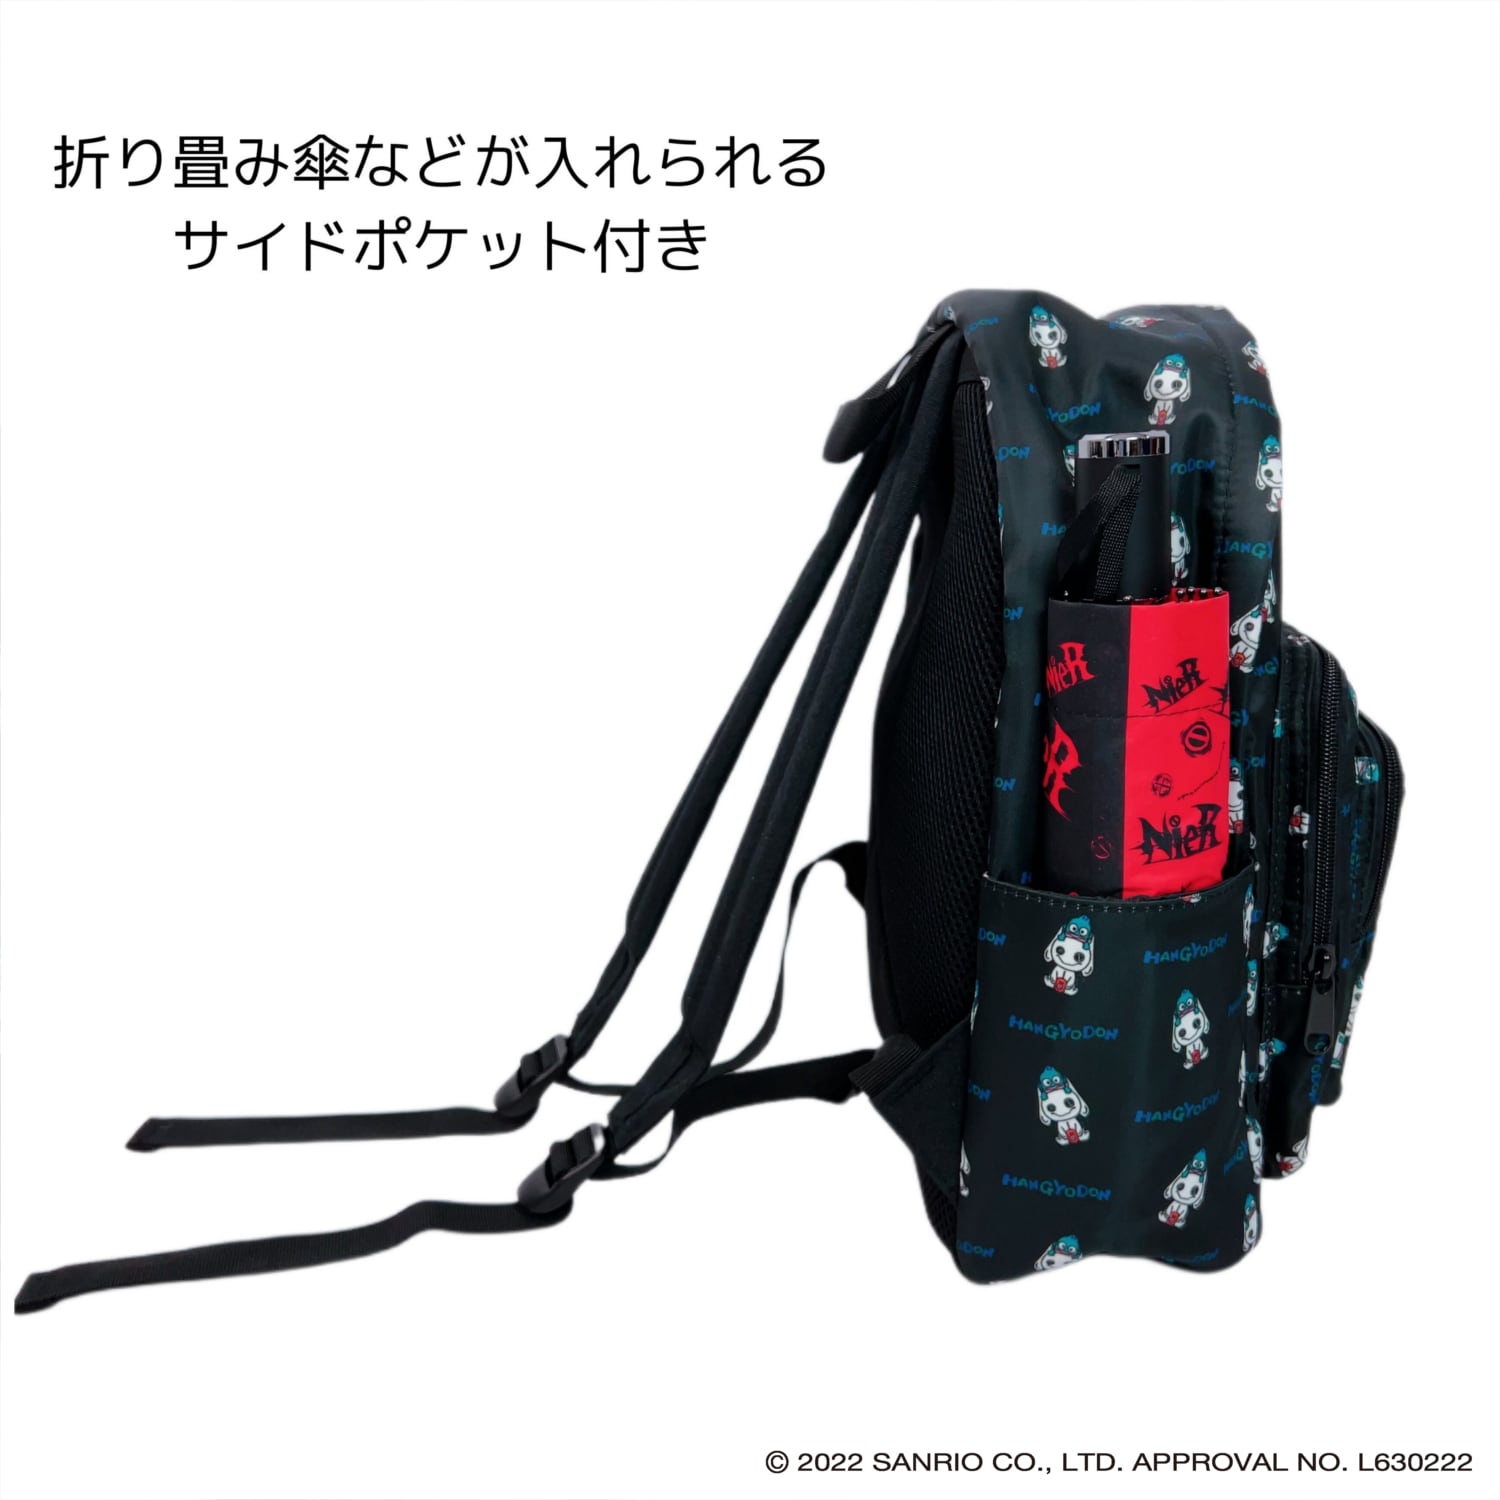 BACKPACK 【ハンギョドン×NieRちゃん】 | NIER CLOTHING powered by BASE